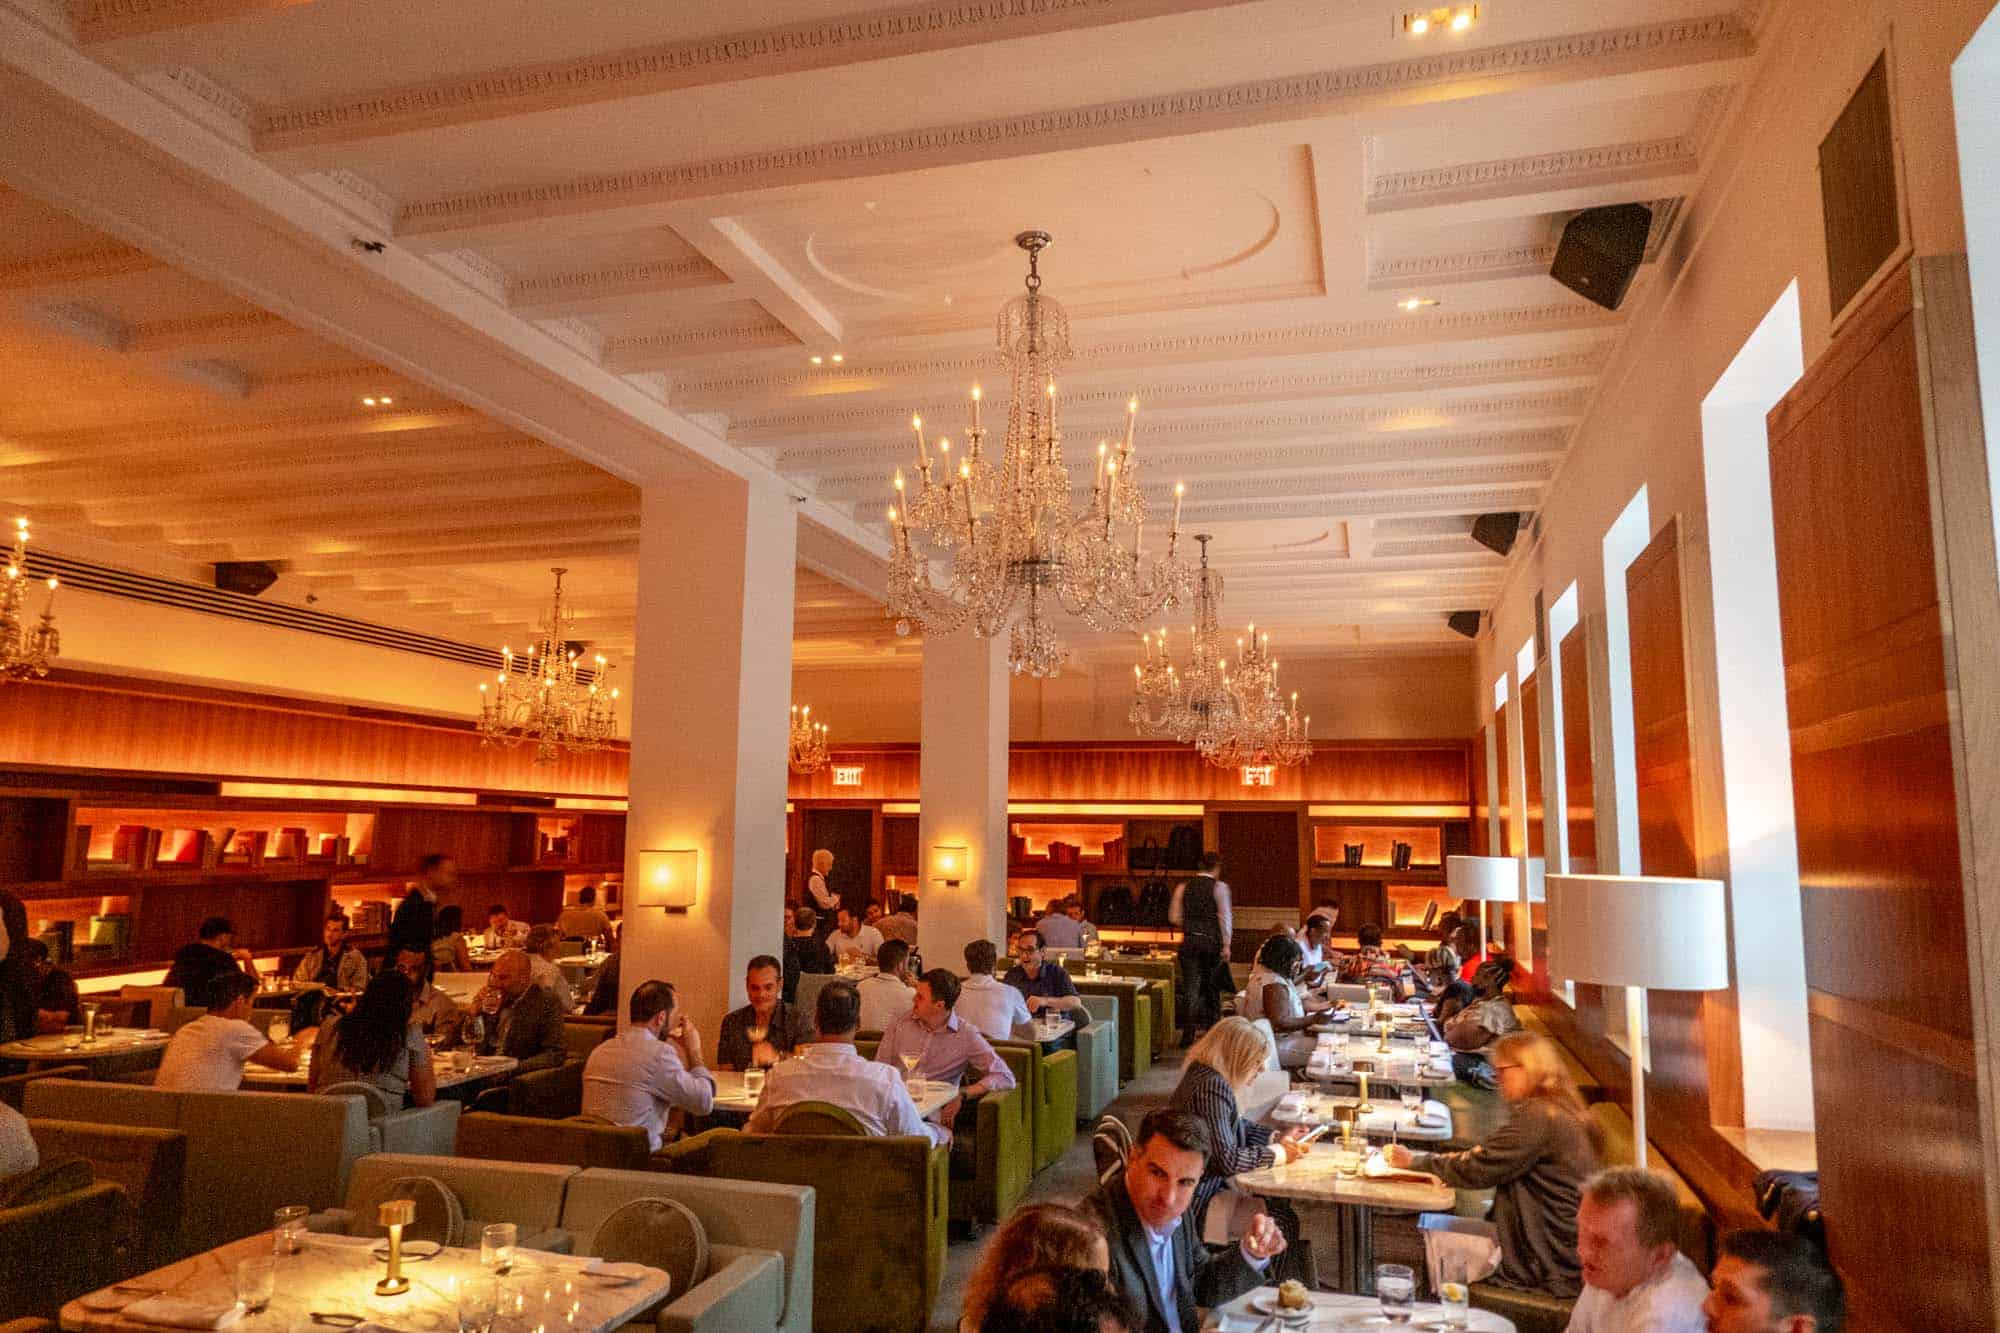 People in a restaurant dining room with green booths and large chandeliers 